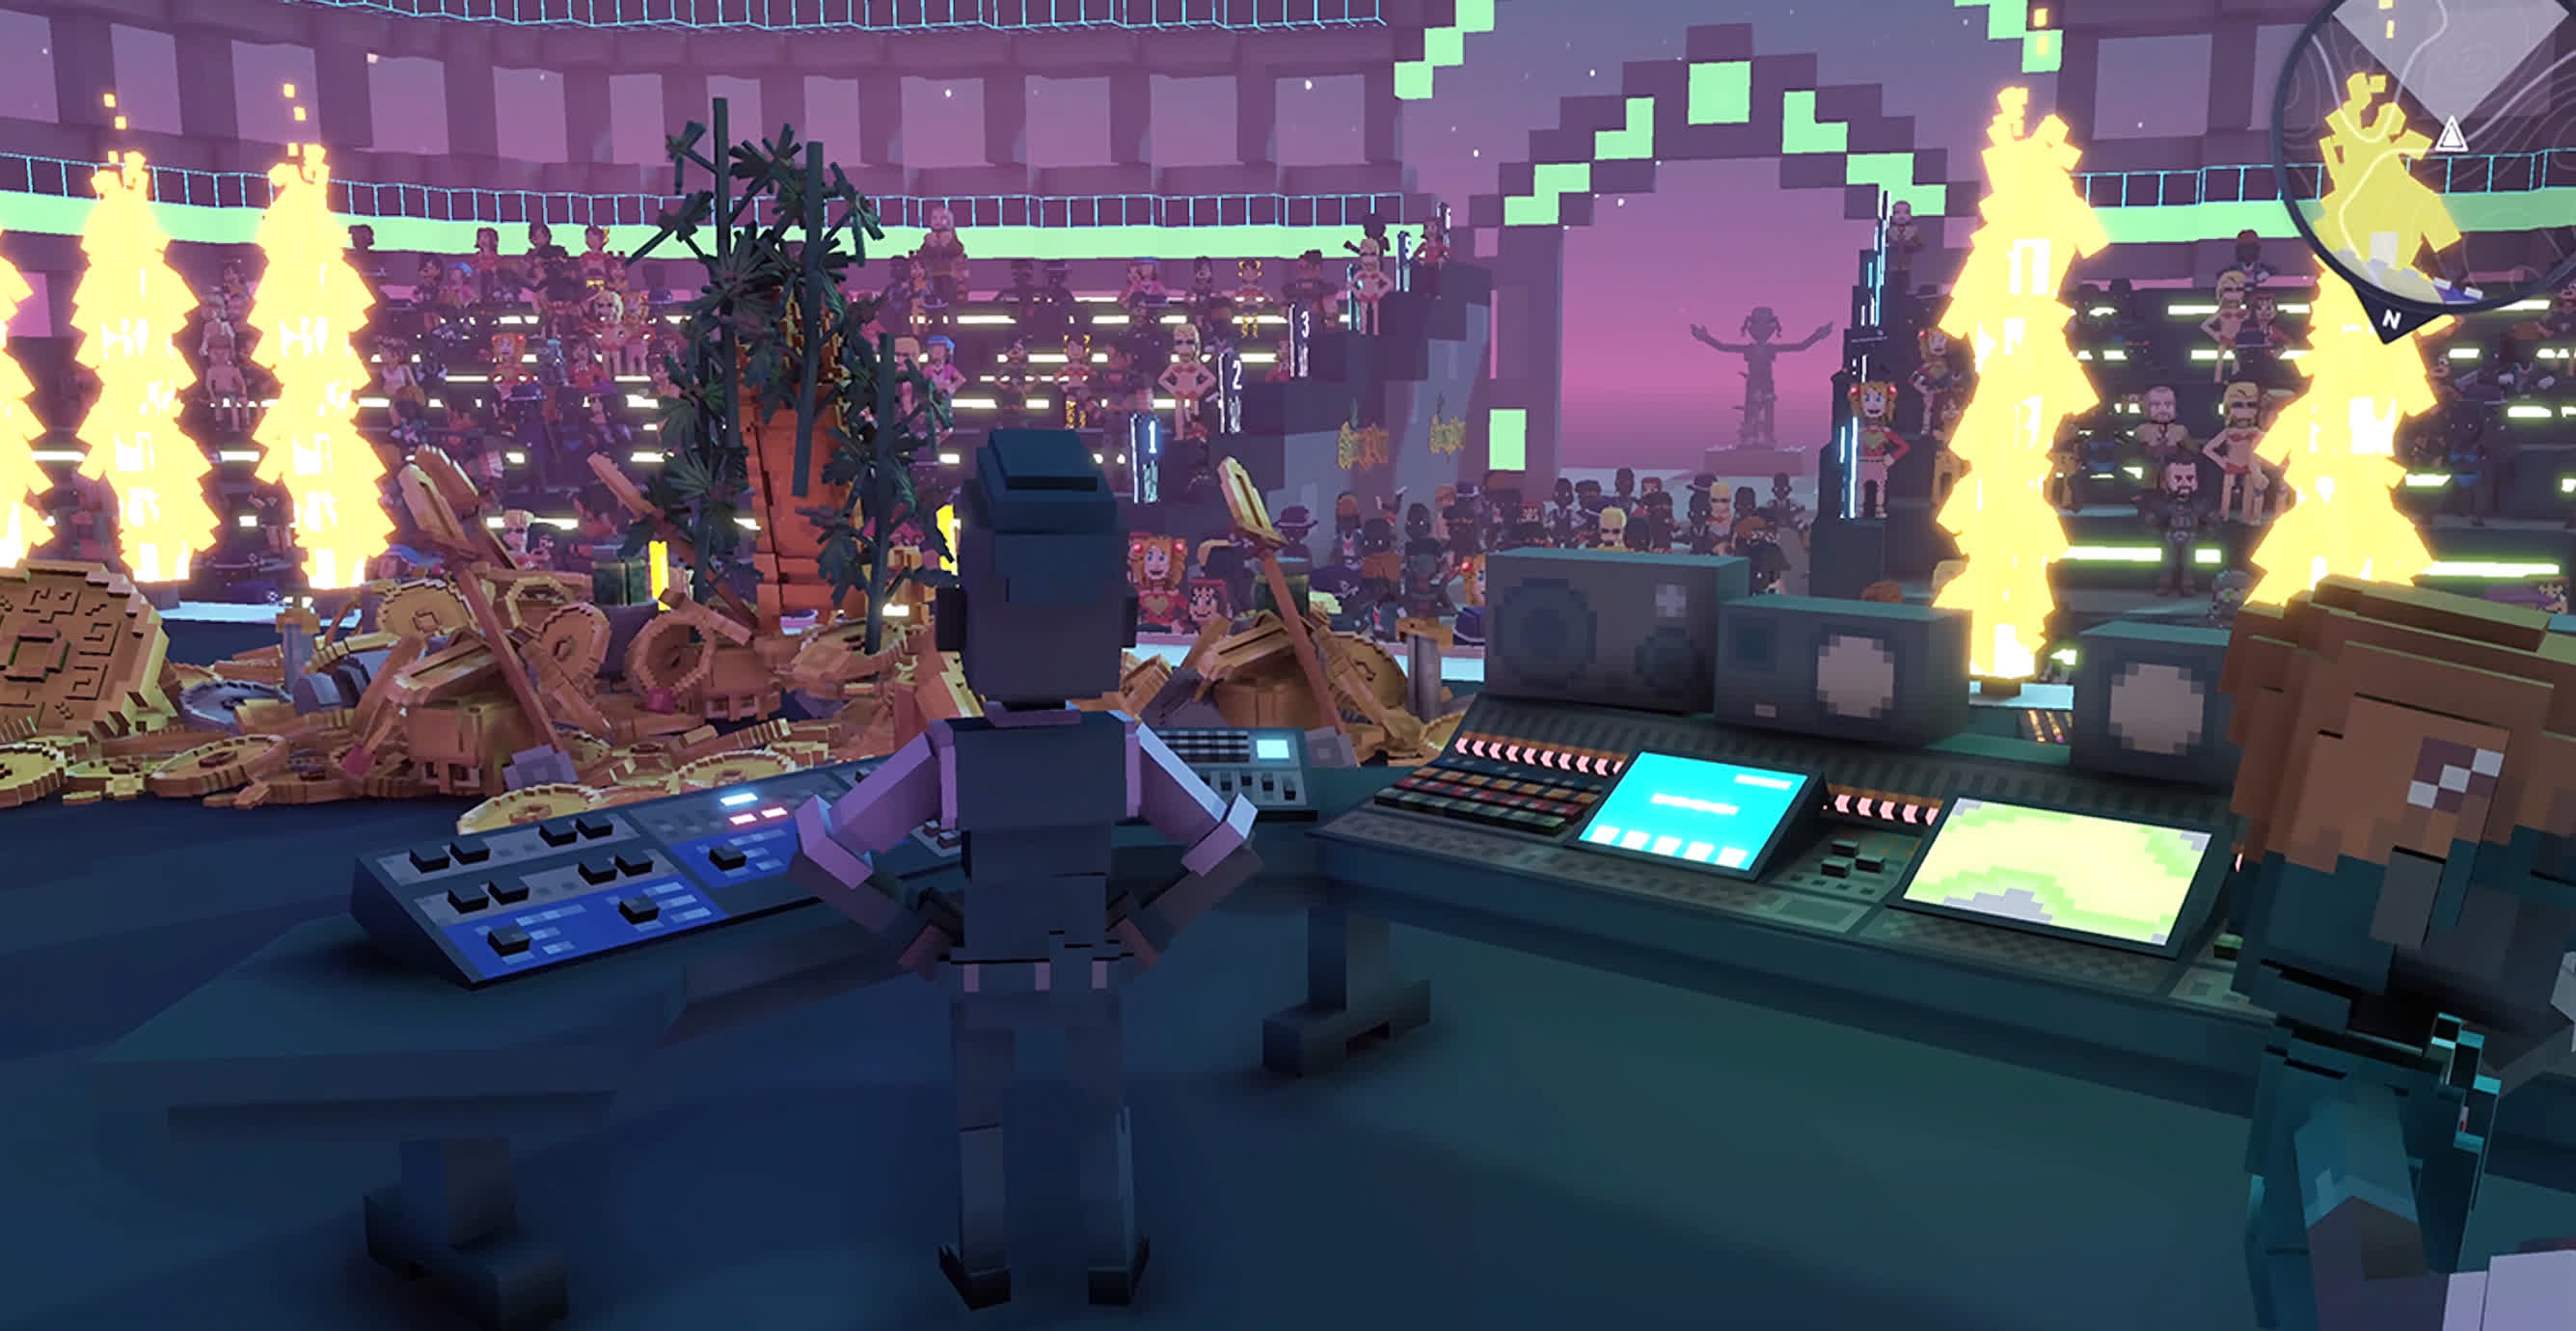 Warner Music and Sandbox are bringing live concerts to the metaverse